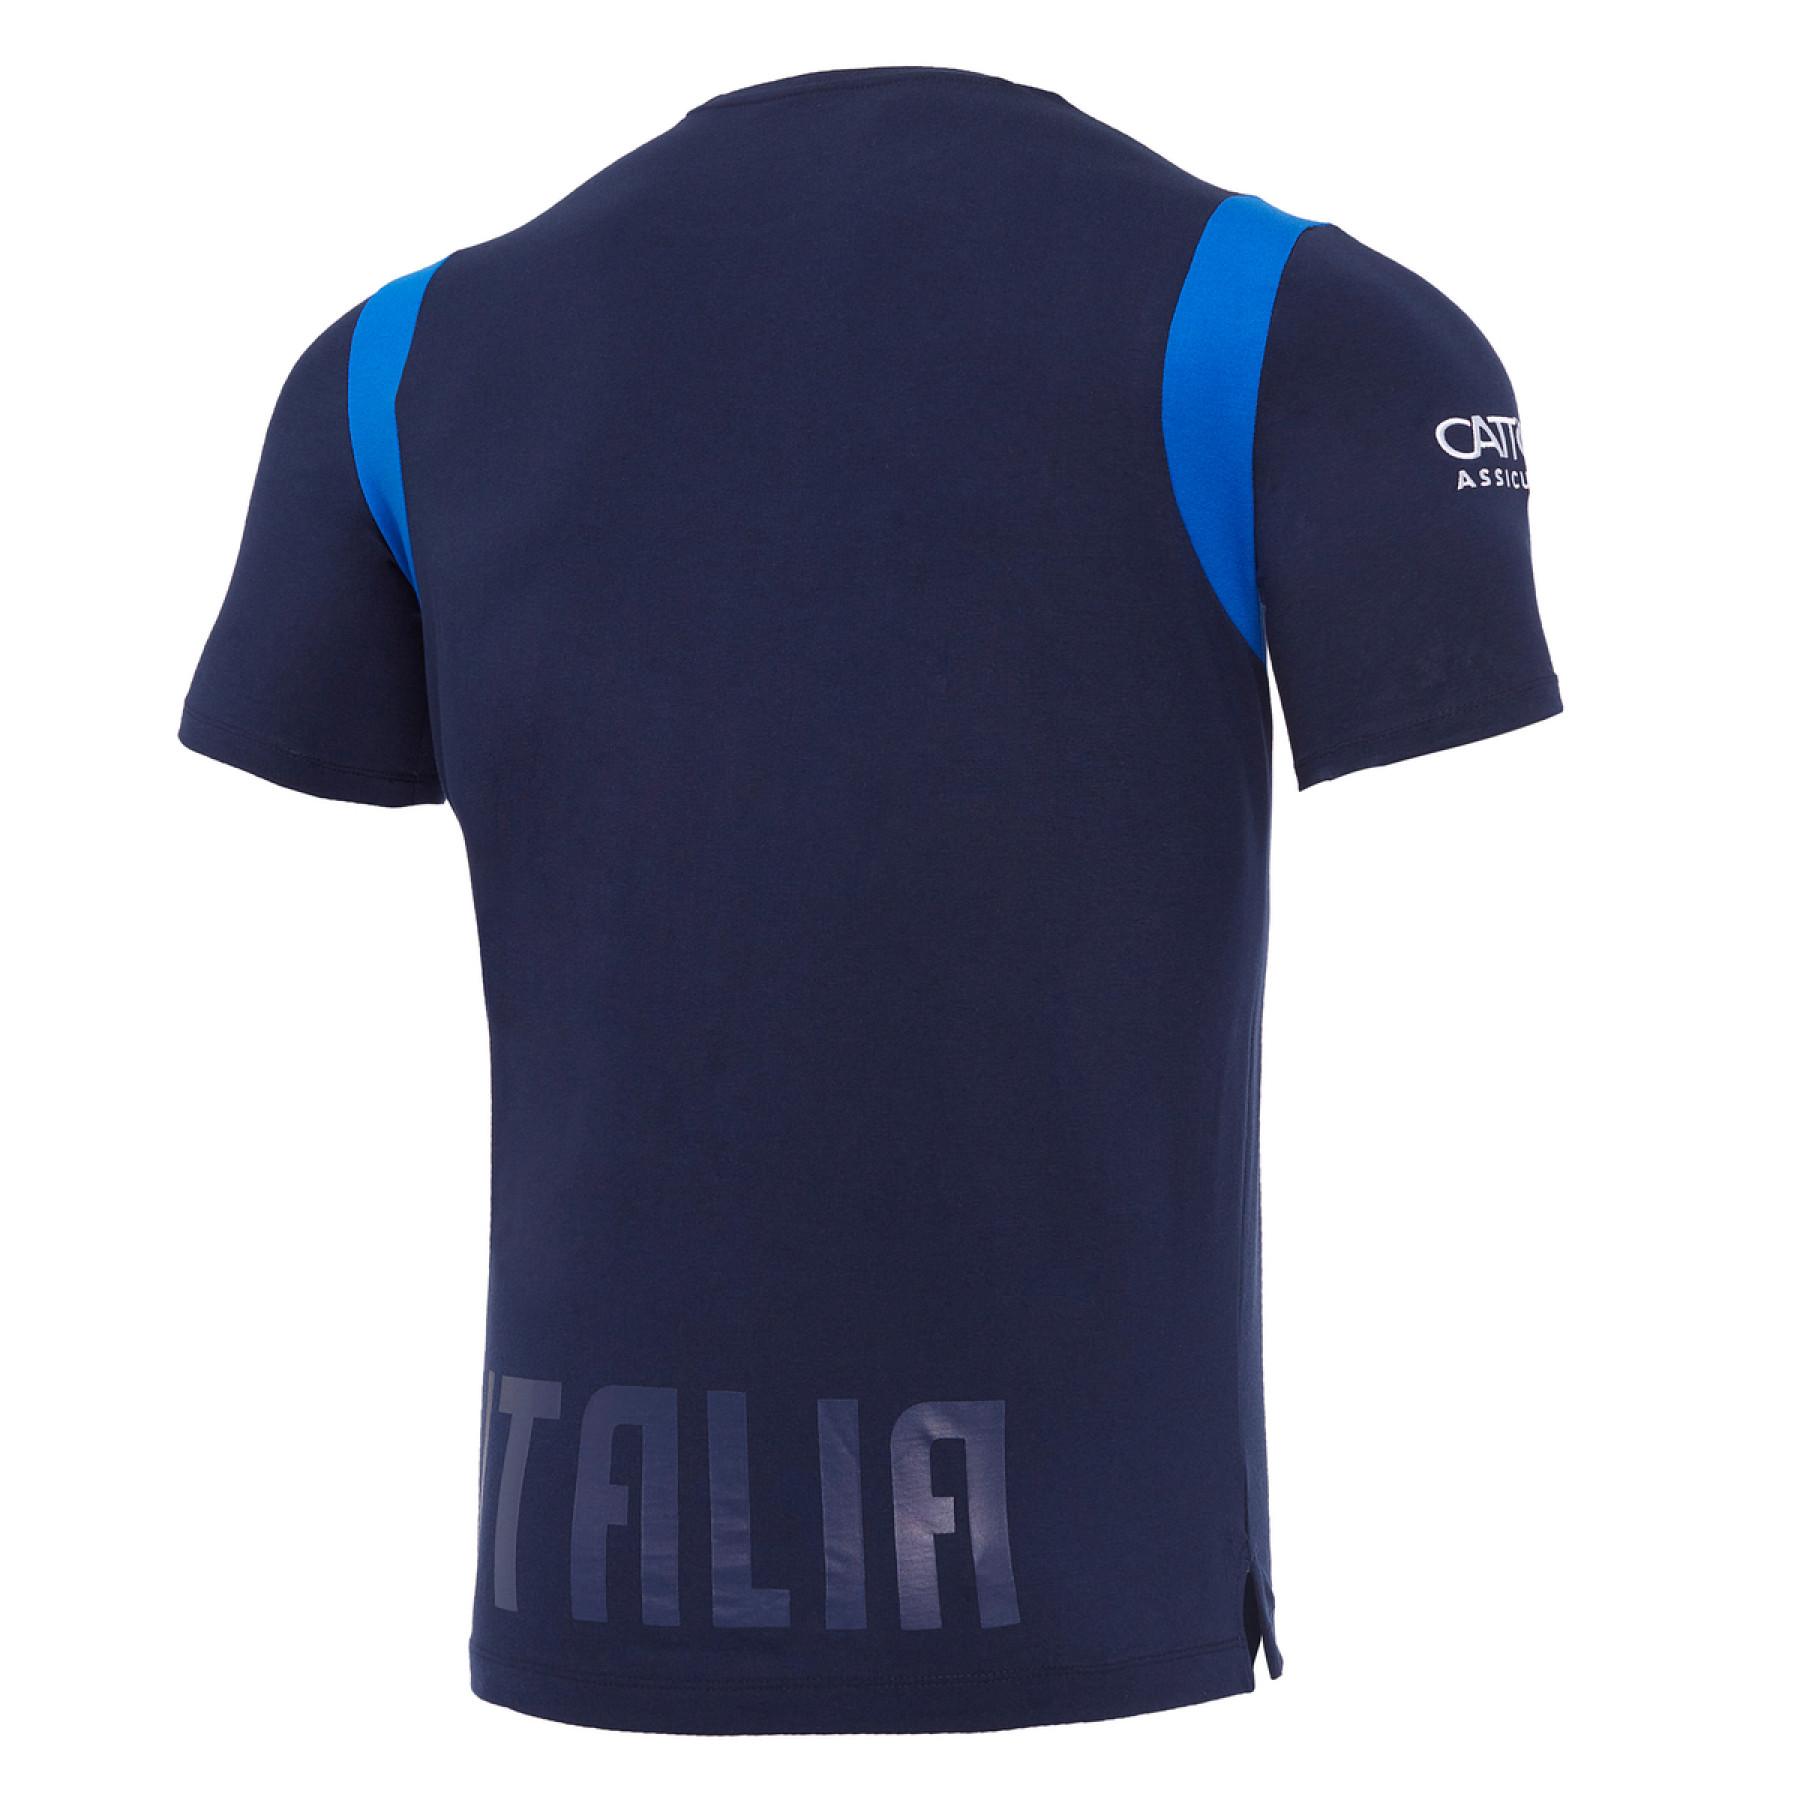 Maillot voyage Italie rugby 2020/21